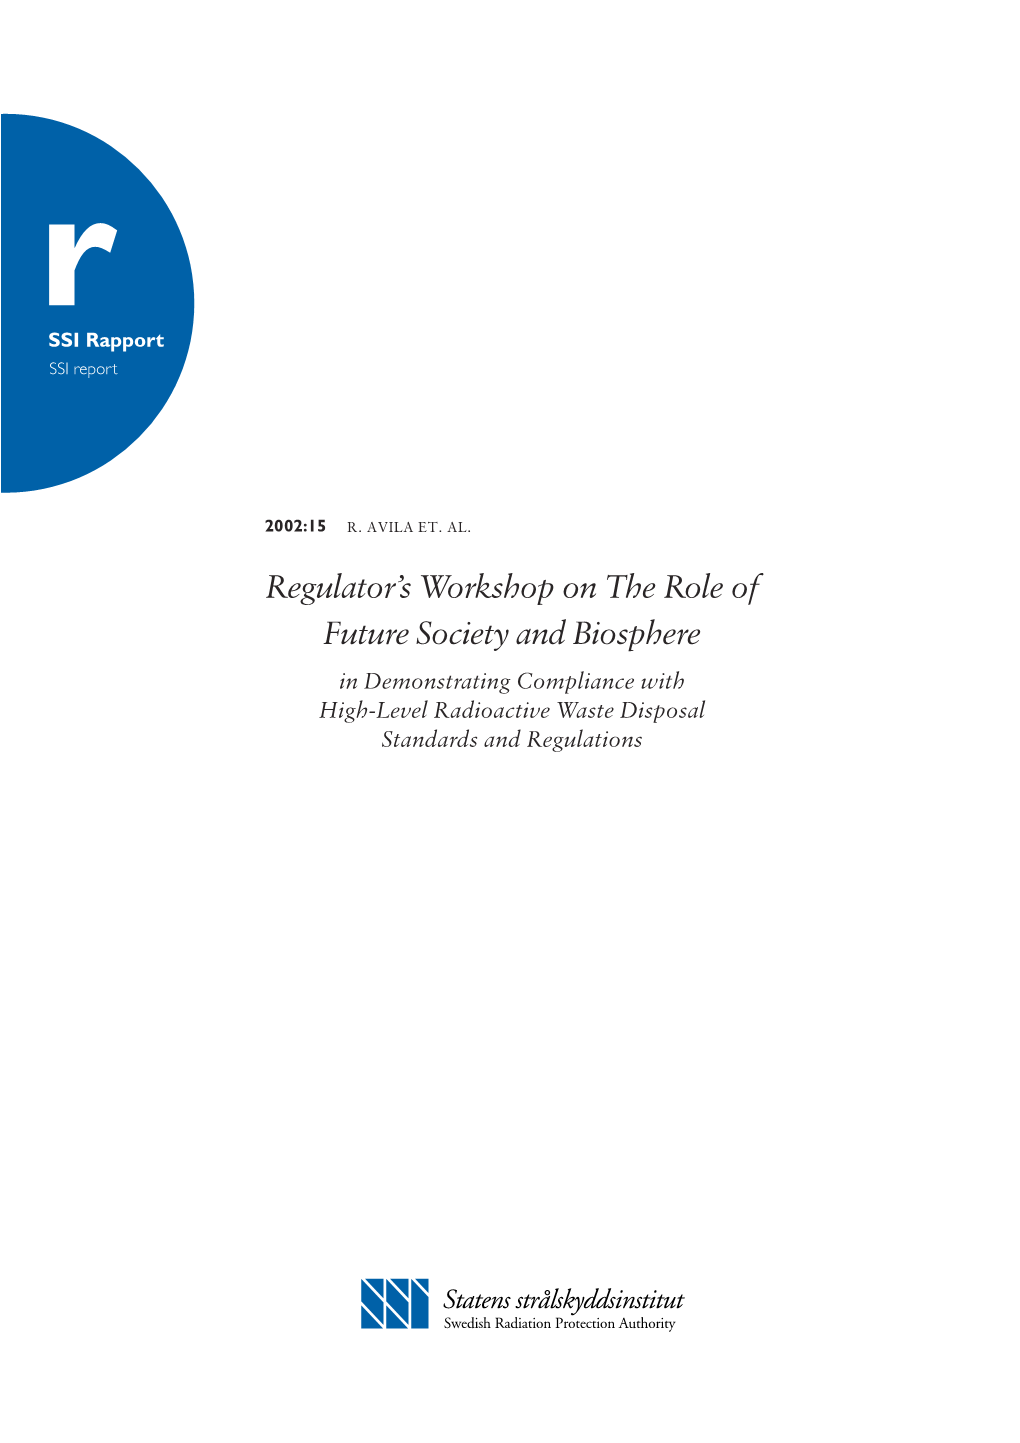 Regulator's Workshop on the Role of Future Society and Biosphere